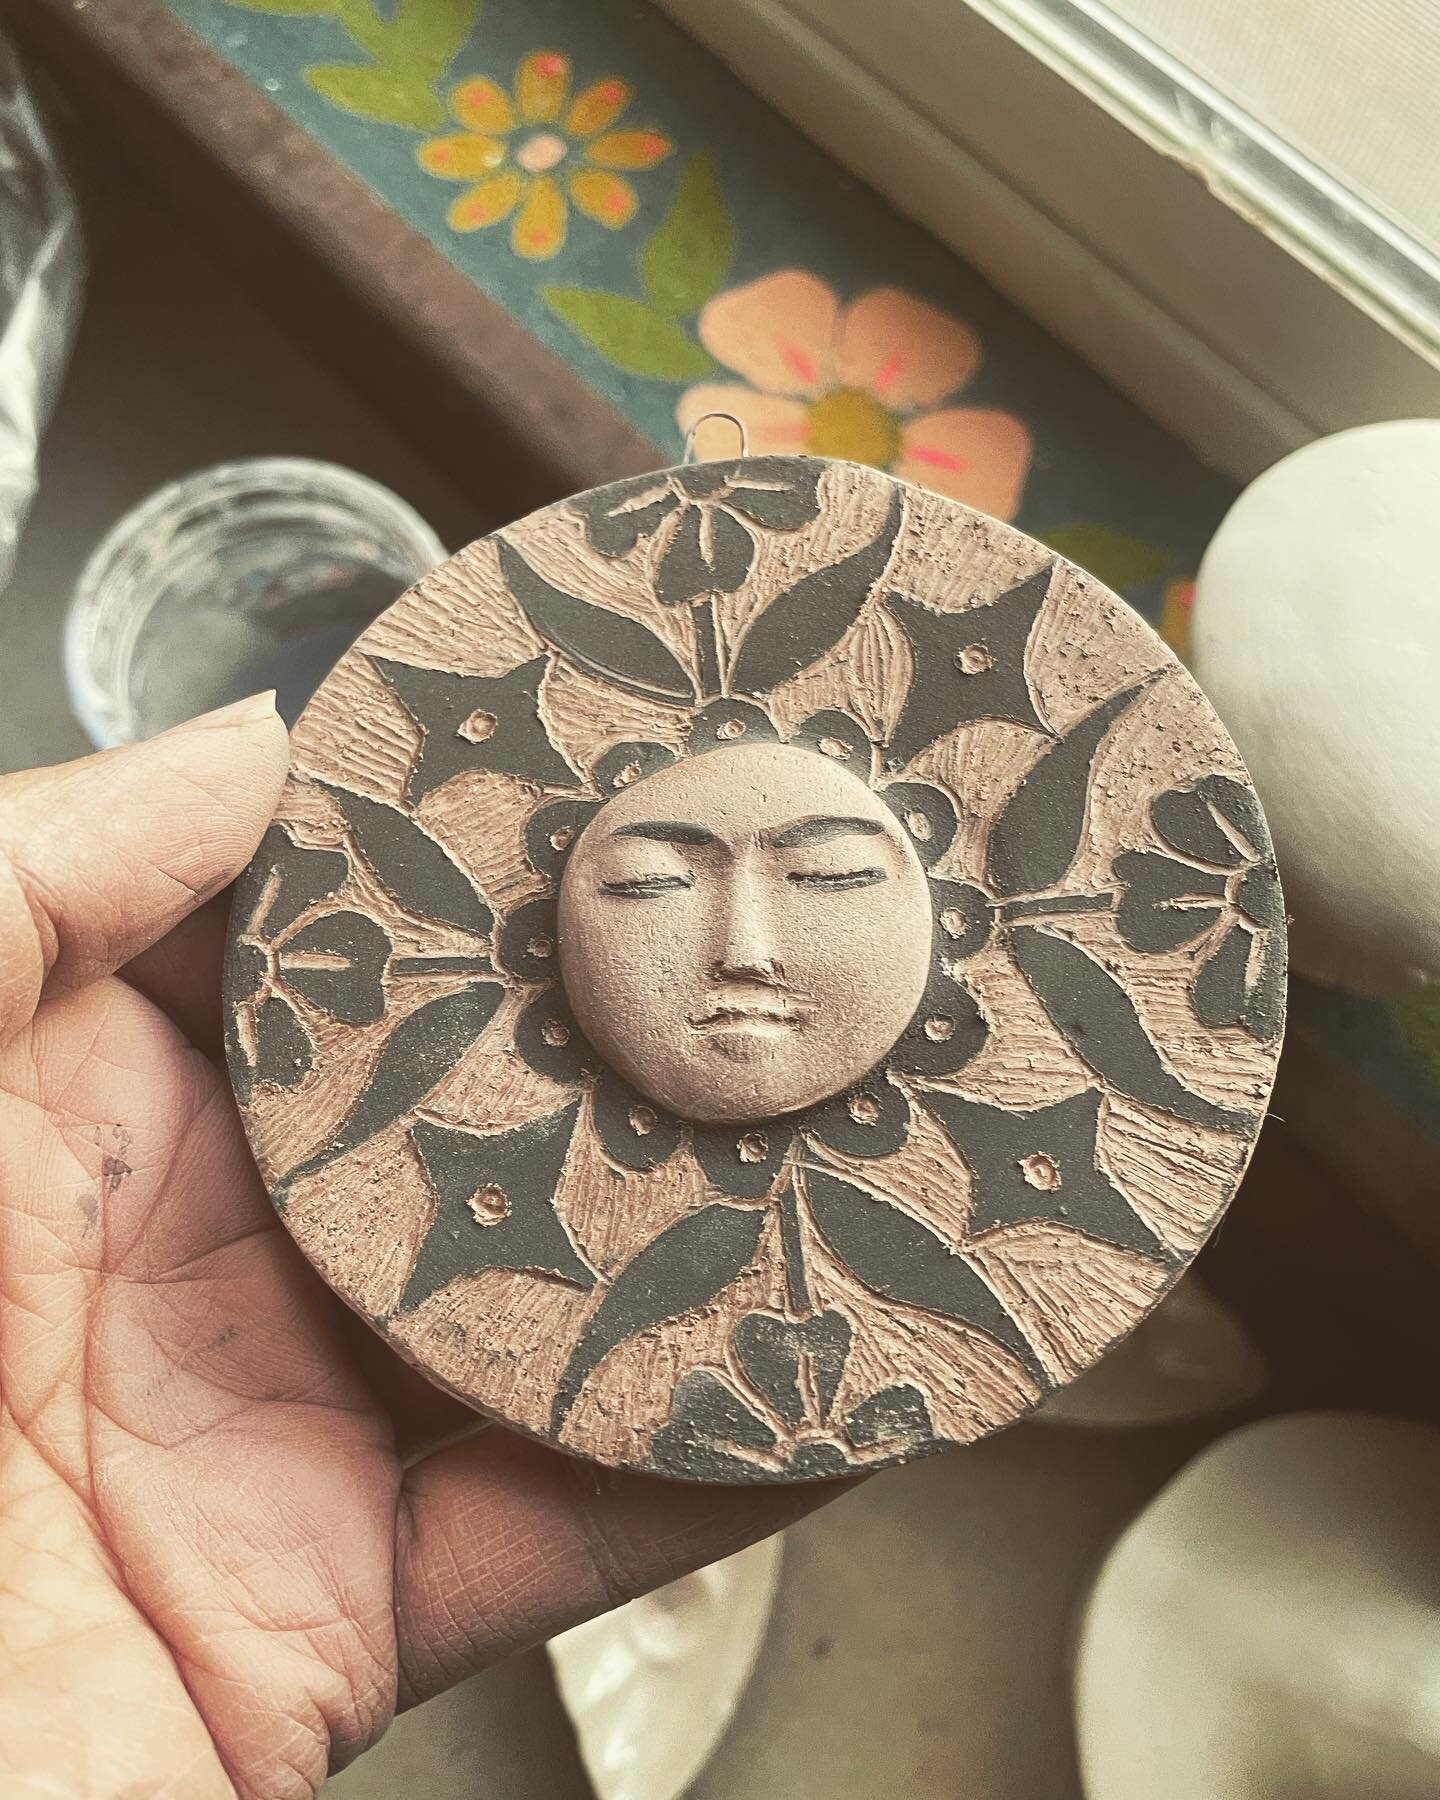 I&rsquo;ve been having a lot of fun in the studio making these tiny little faces. #clay #underglaze #sgraffito